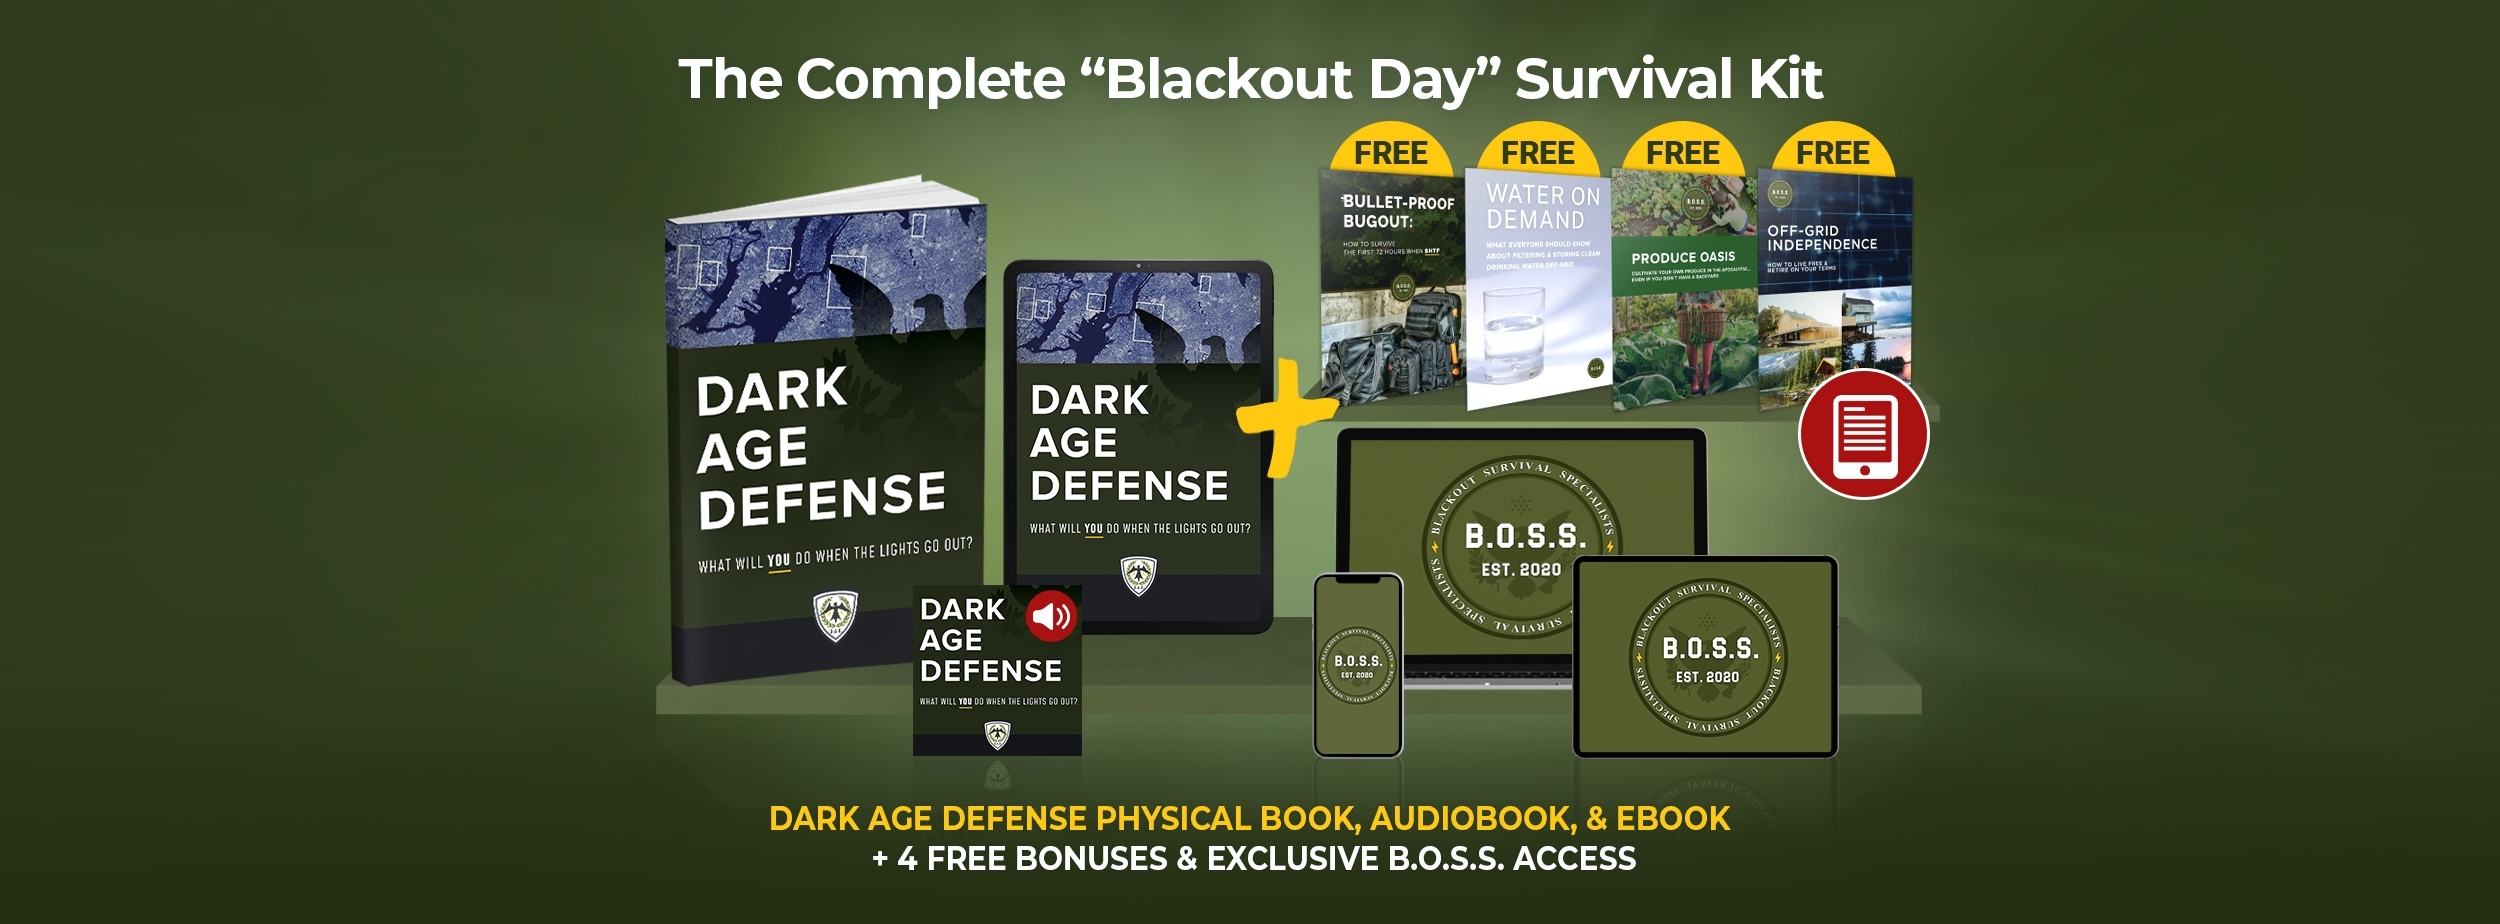 infinity coil forum The Complete Blackout Day Power Plan Survival Kit For Defense Against The Dark Age eBook Book Audio